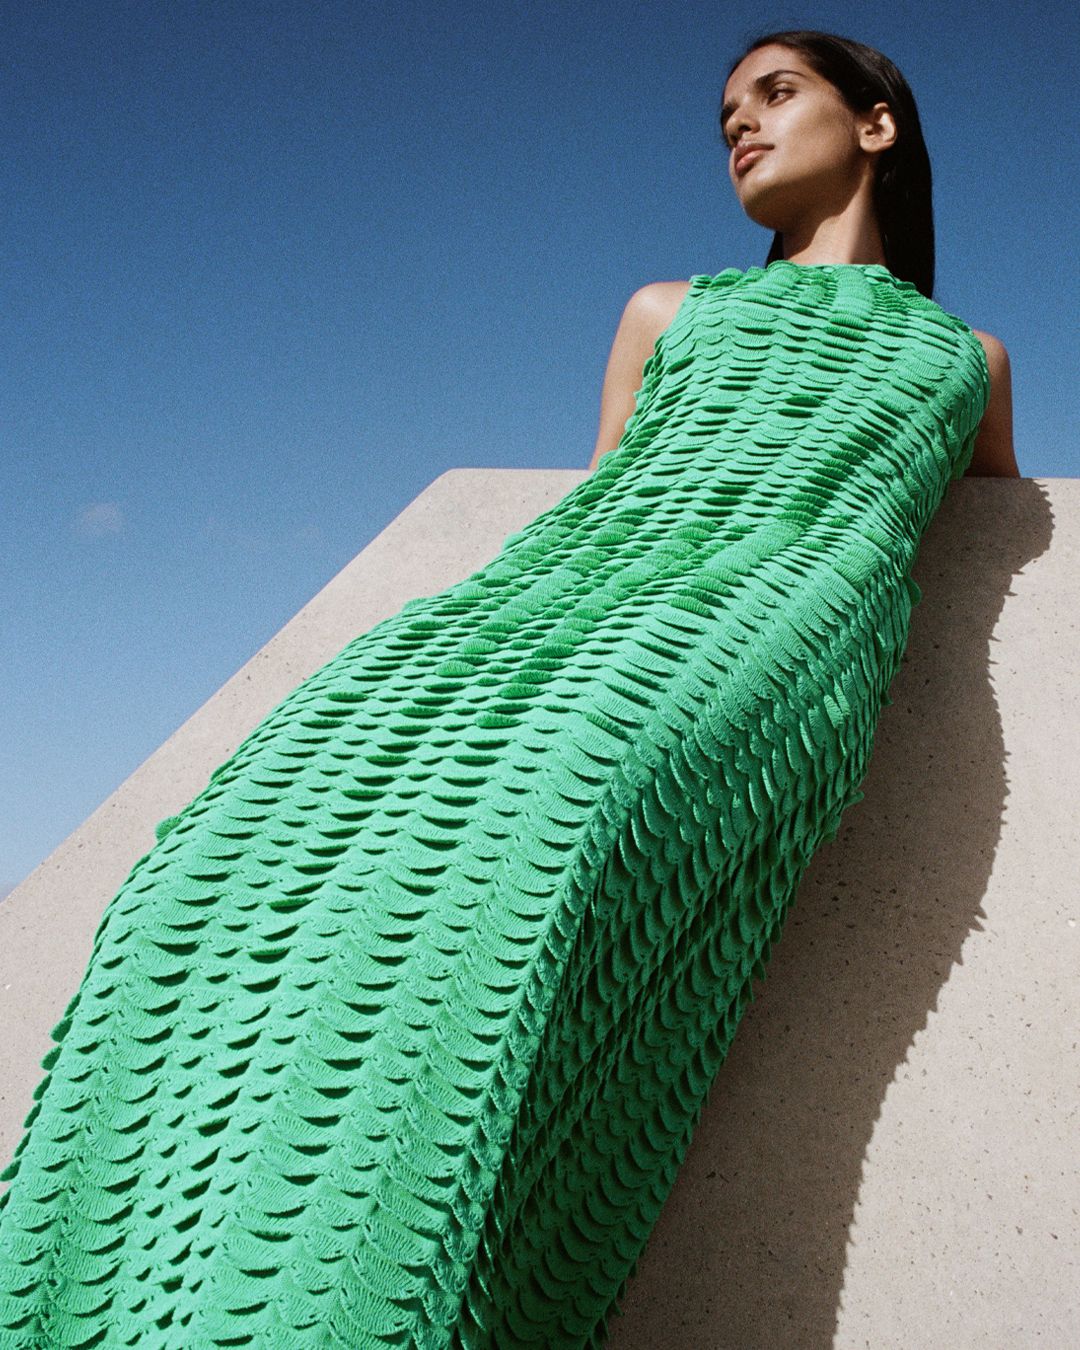 Girl looking away from the camera, leaning against concrete wall in textured green knit dress. 